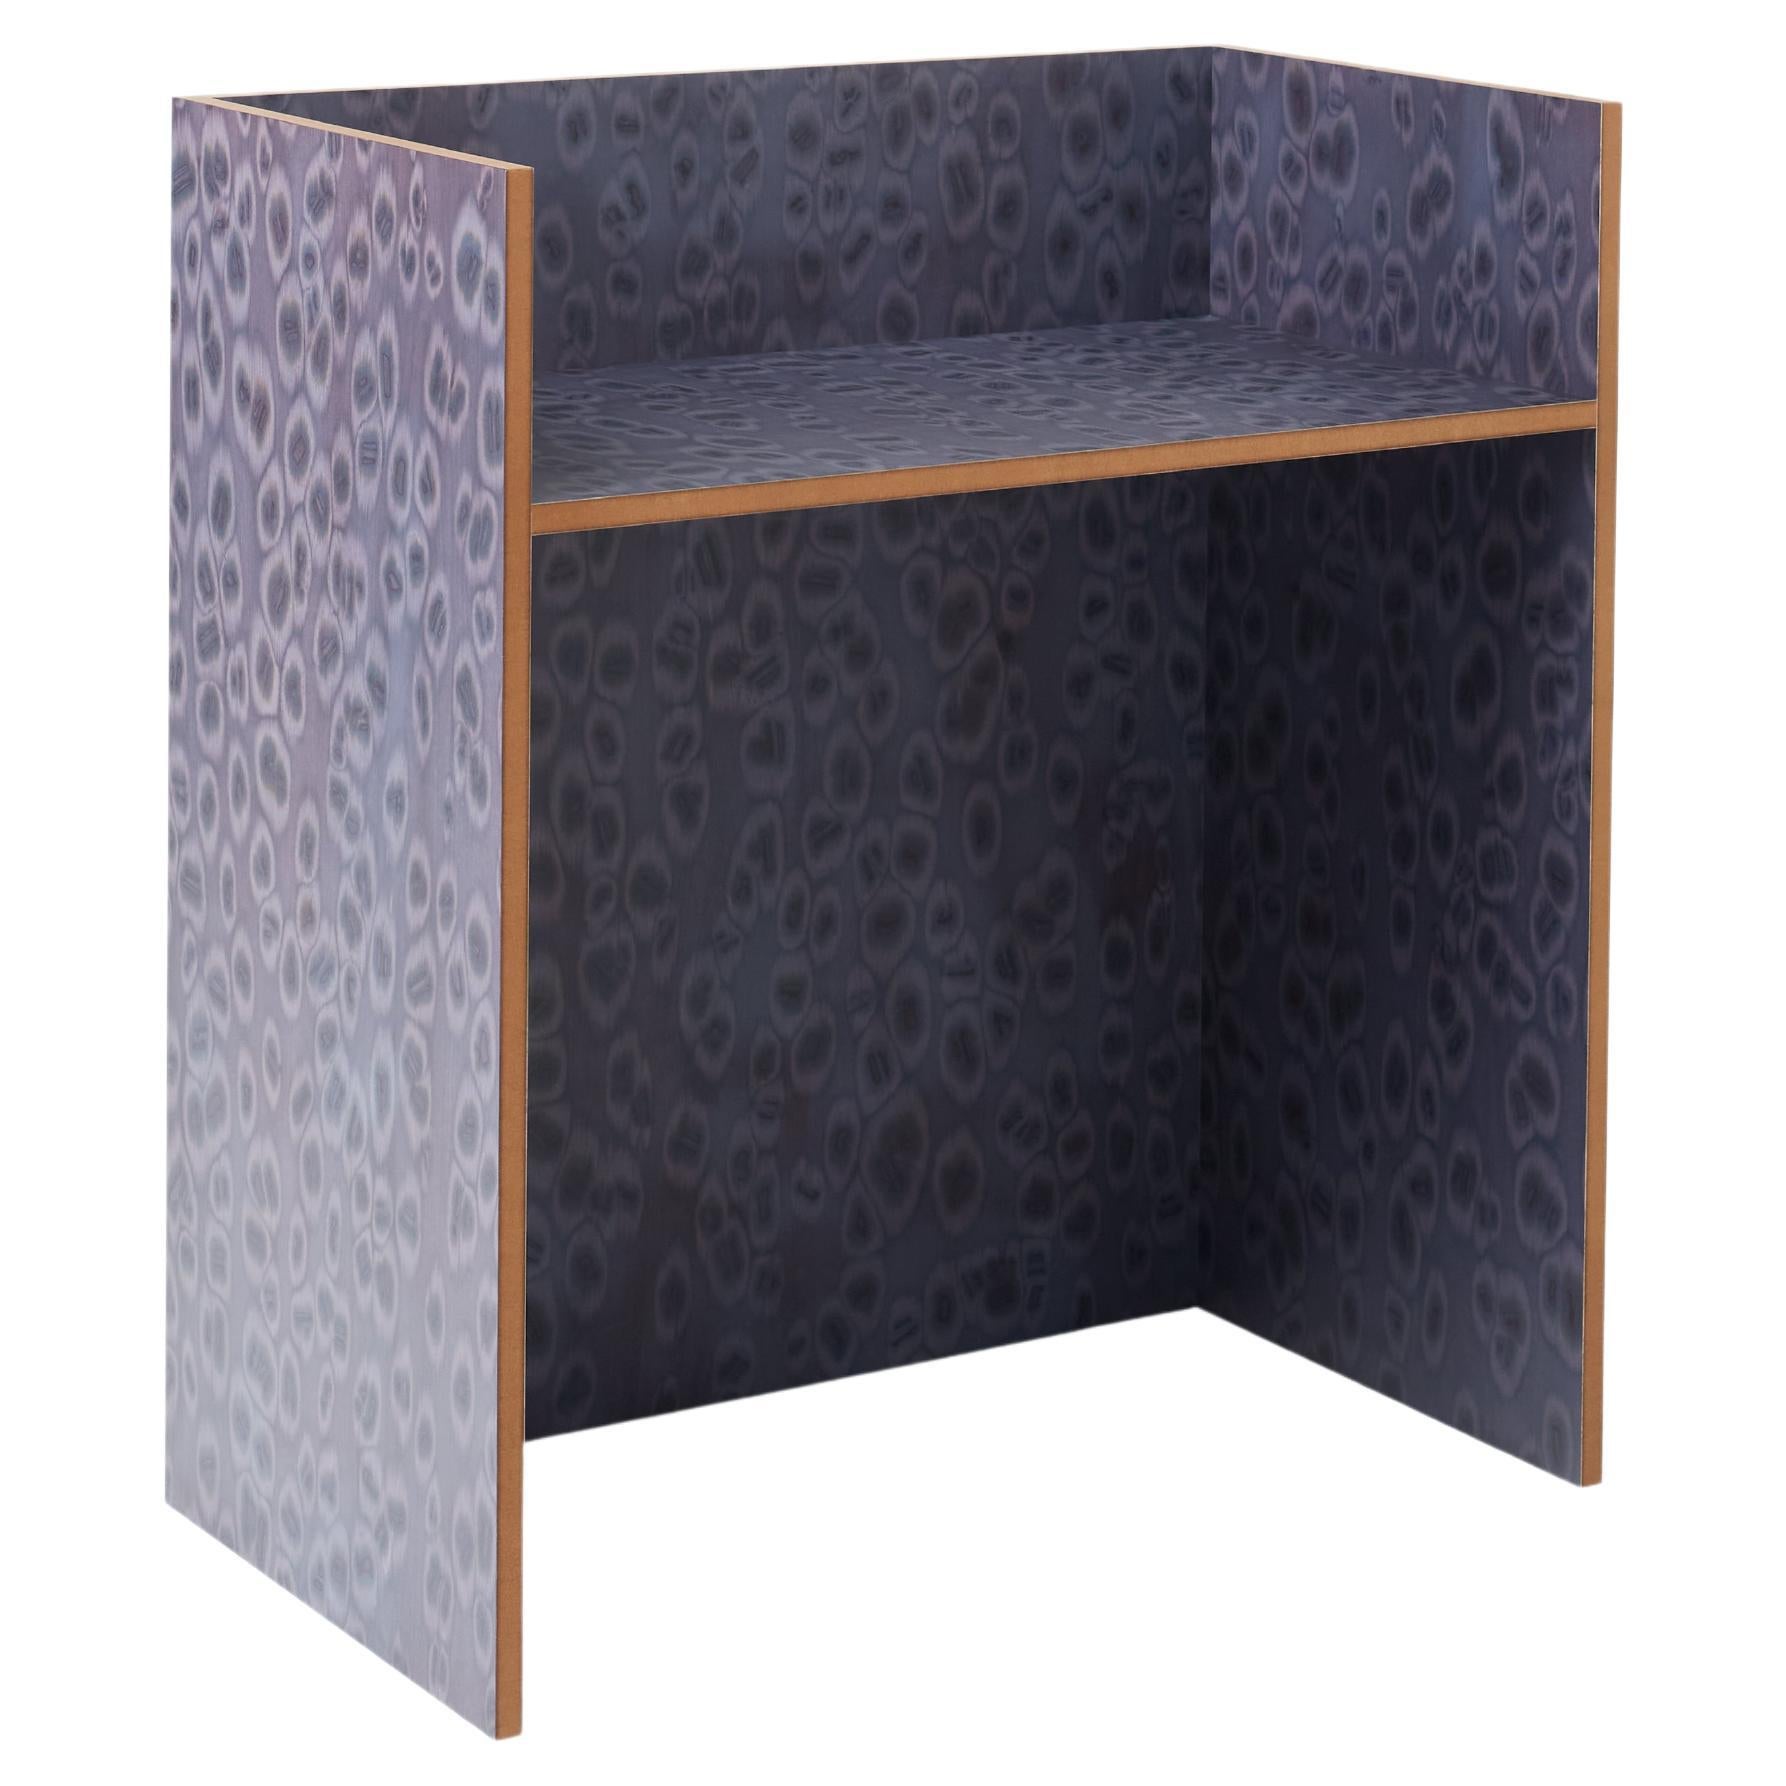 Apartment-Sized Patterned Osis Desk by Llot Llov For Sale